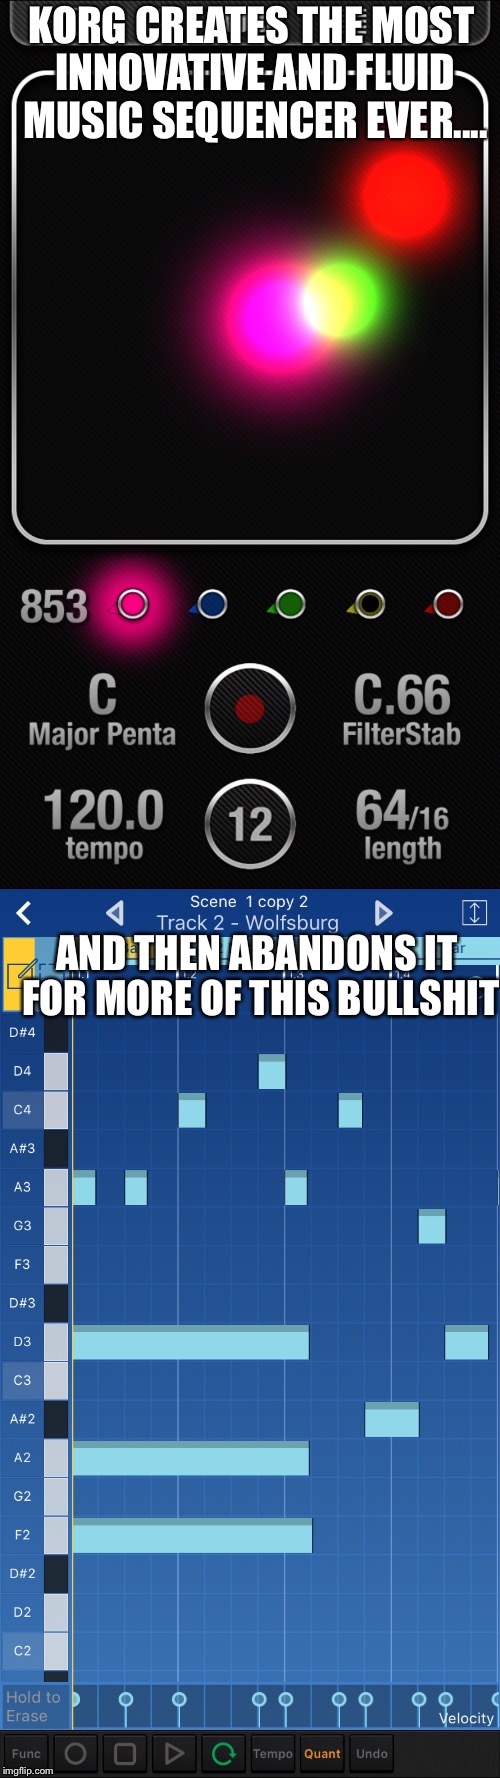 iKaossilator | KORG CREATES THE MOST INNOVATIVE AND FLUID MUSIC SEQUENCER EVER.... AND THEN ABANDONS IT FOR MORE OF THIS BULLSHIT | image tagged in music production,app,sequencer,10 guy | made w/ Imgflip meme maker